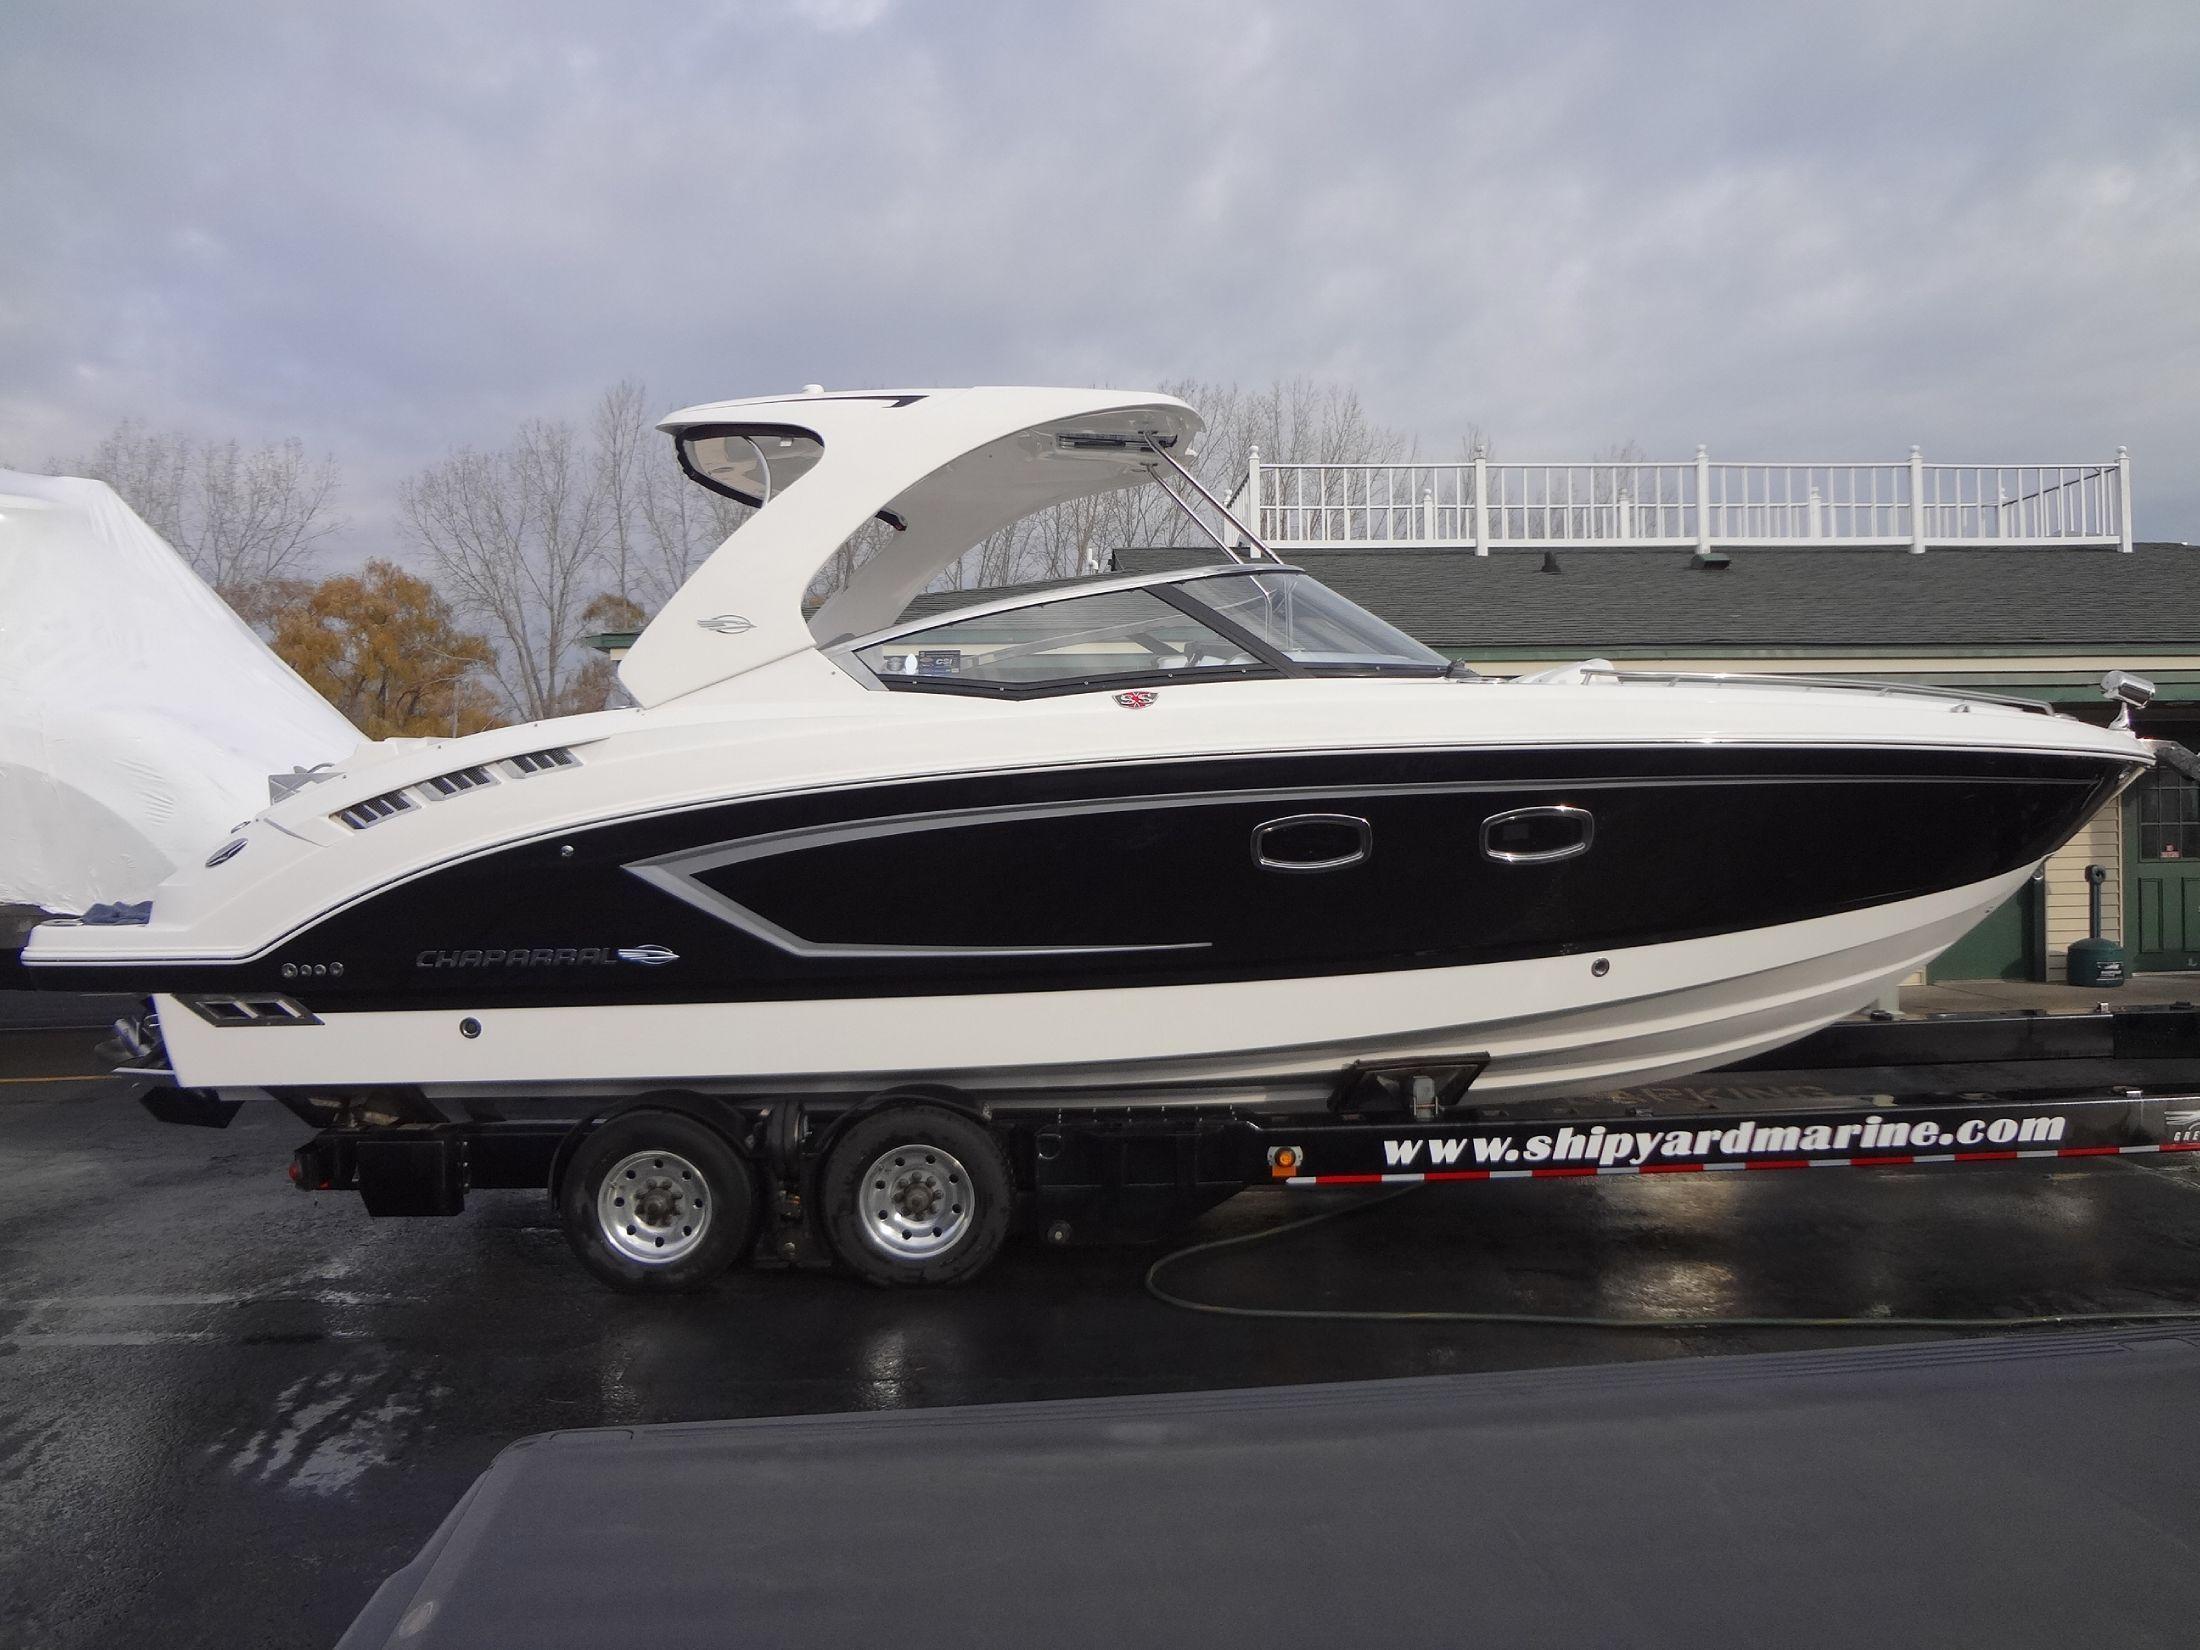 Chaparral 327 SSX, Green Bay